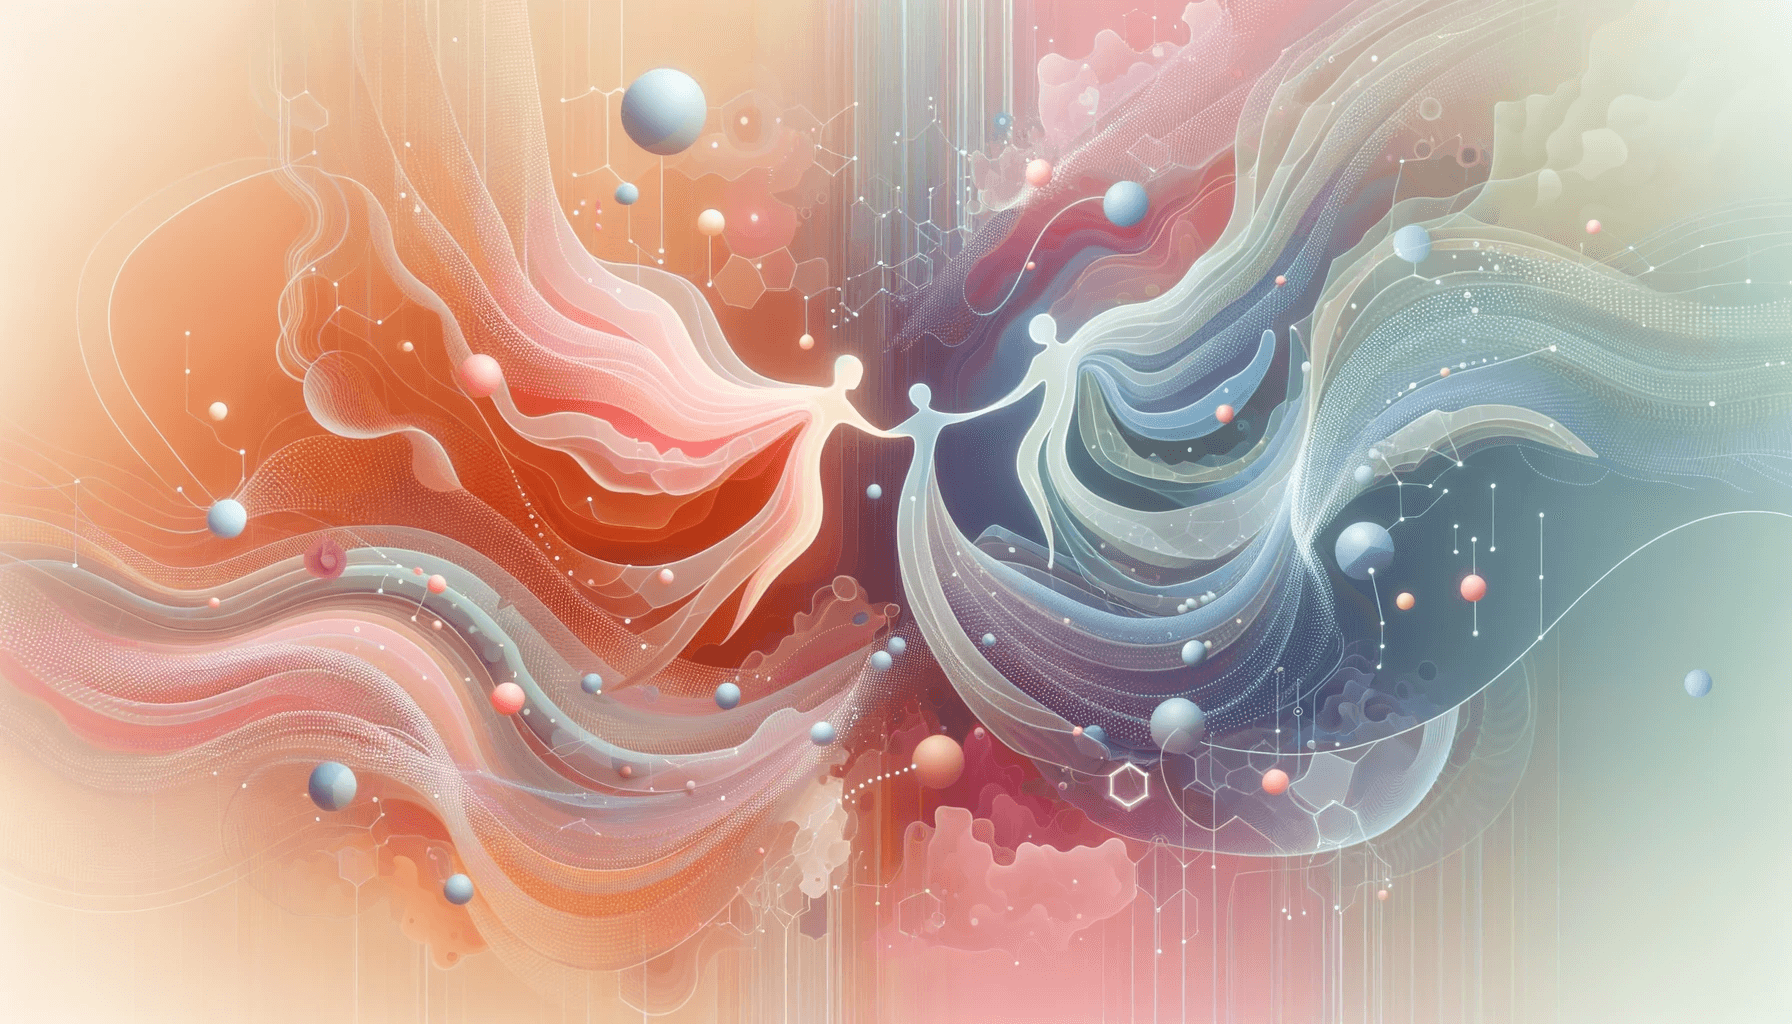 Illustration in a 16:9 aspect ratio that portrays the harmony between AI and human collaboration. Abstract shapes, possibly representing data and algorithms, dance and intertwine with ethereal human figures. Soft color gradients enhance the feeling of com